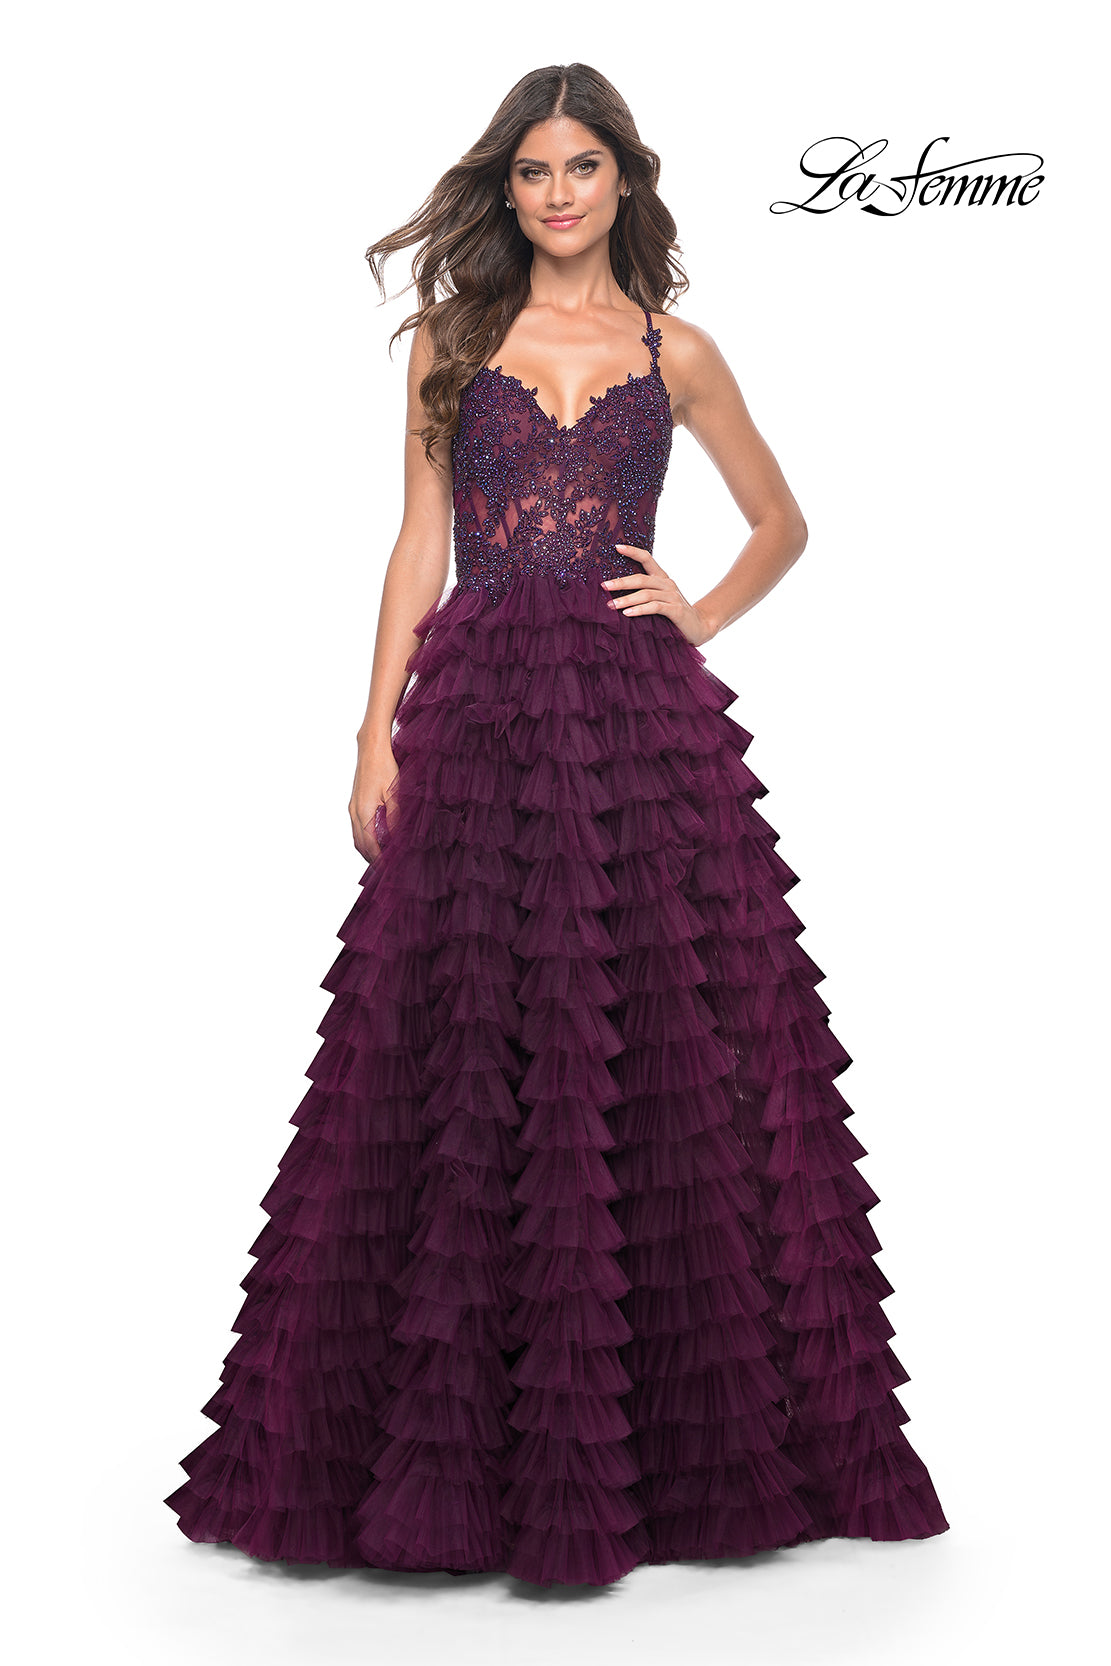 La-Femme-32128-Sweetheart-Neckline-Lace-up-Back-High-Slit-Lace-Tulle-Ball-Gowns-Dark-Berry-Evening-Dress-B-Chic-Fashions-Prom-Dress